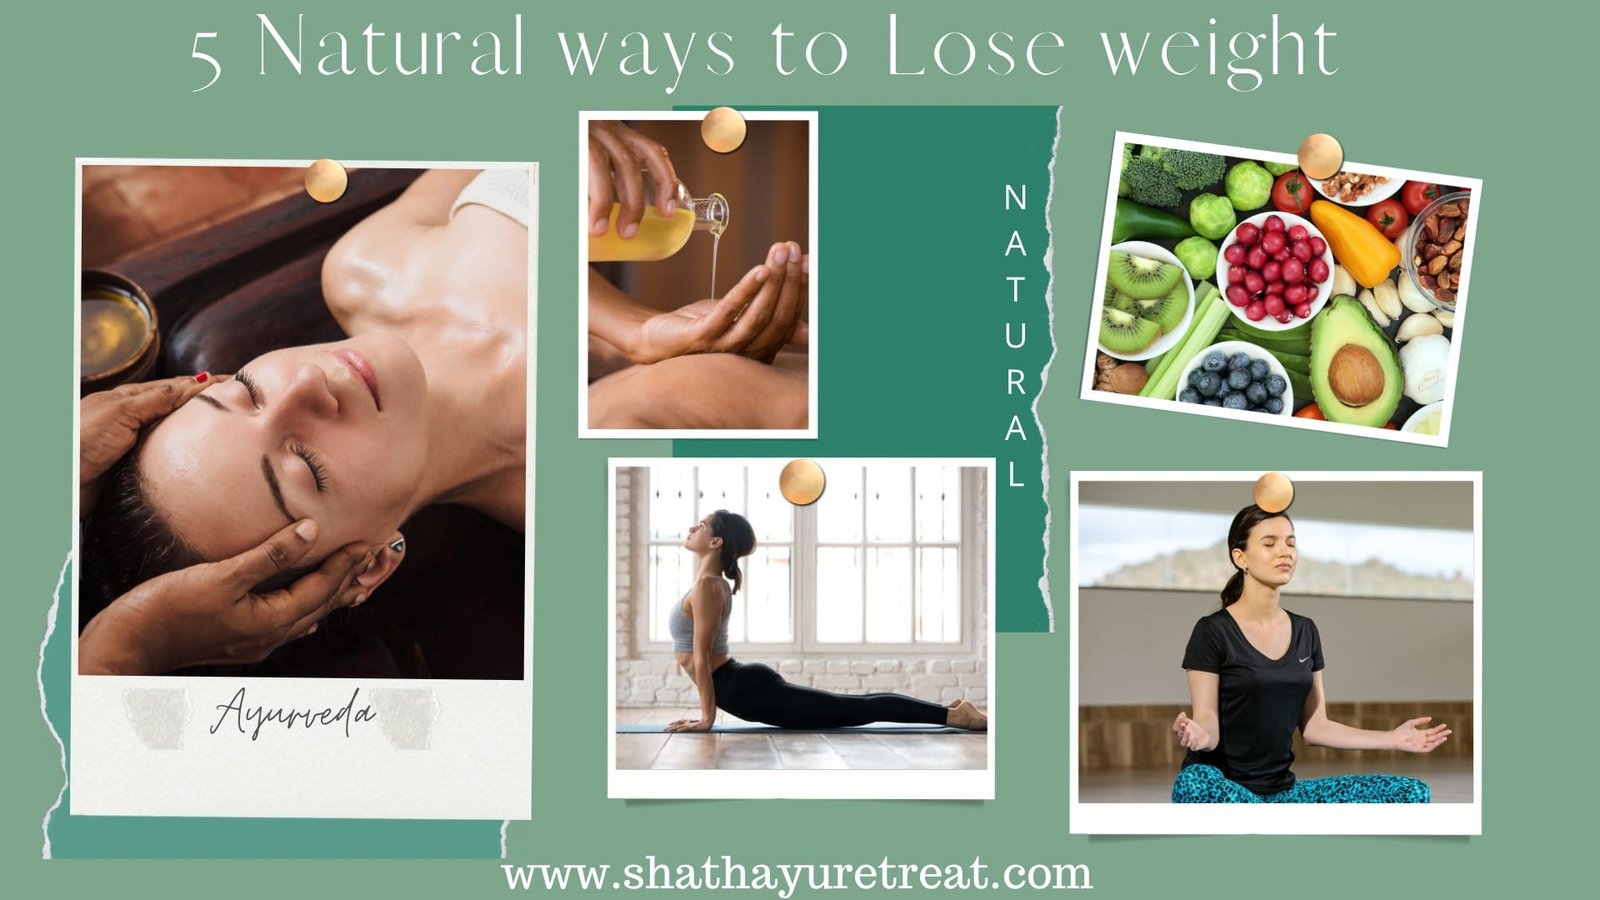 5 Holistic Weight Loss ways to achieve your New year Resolution